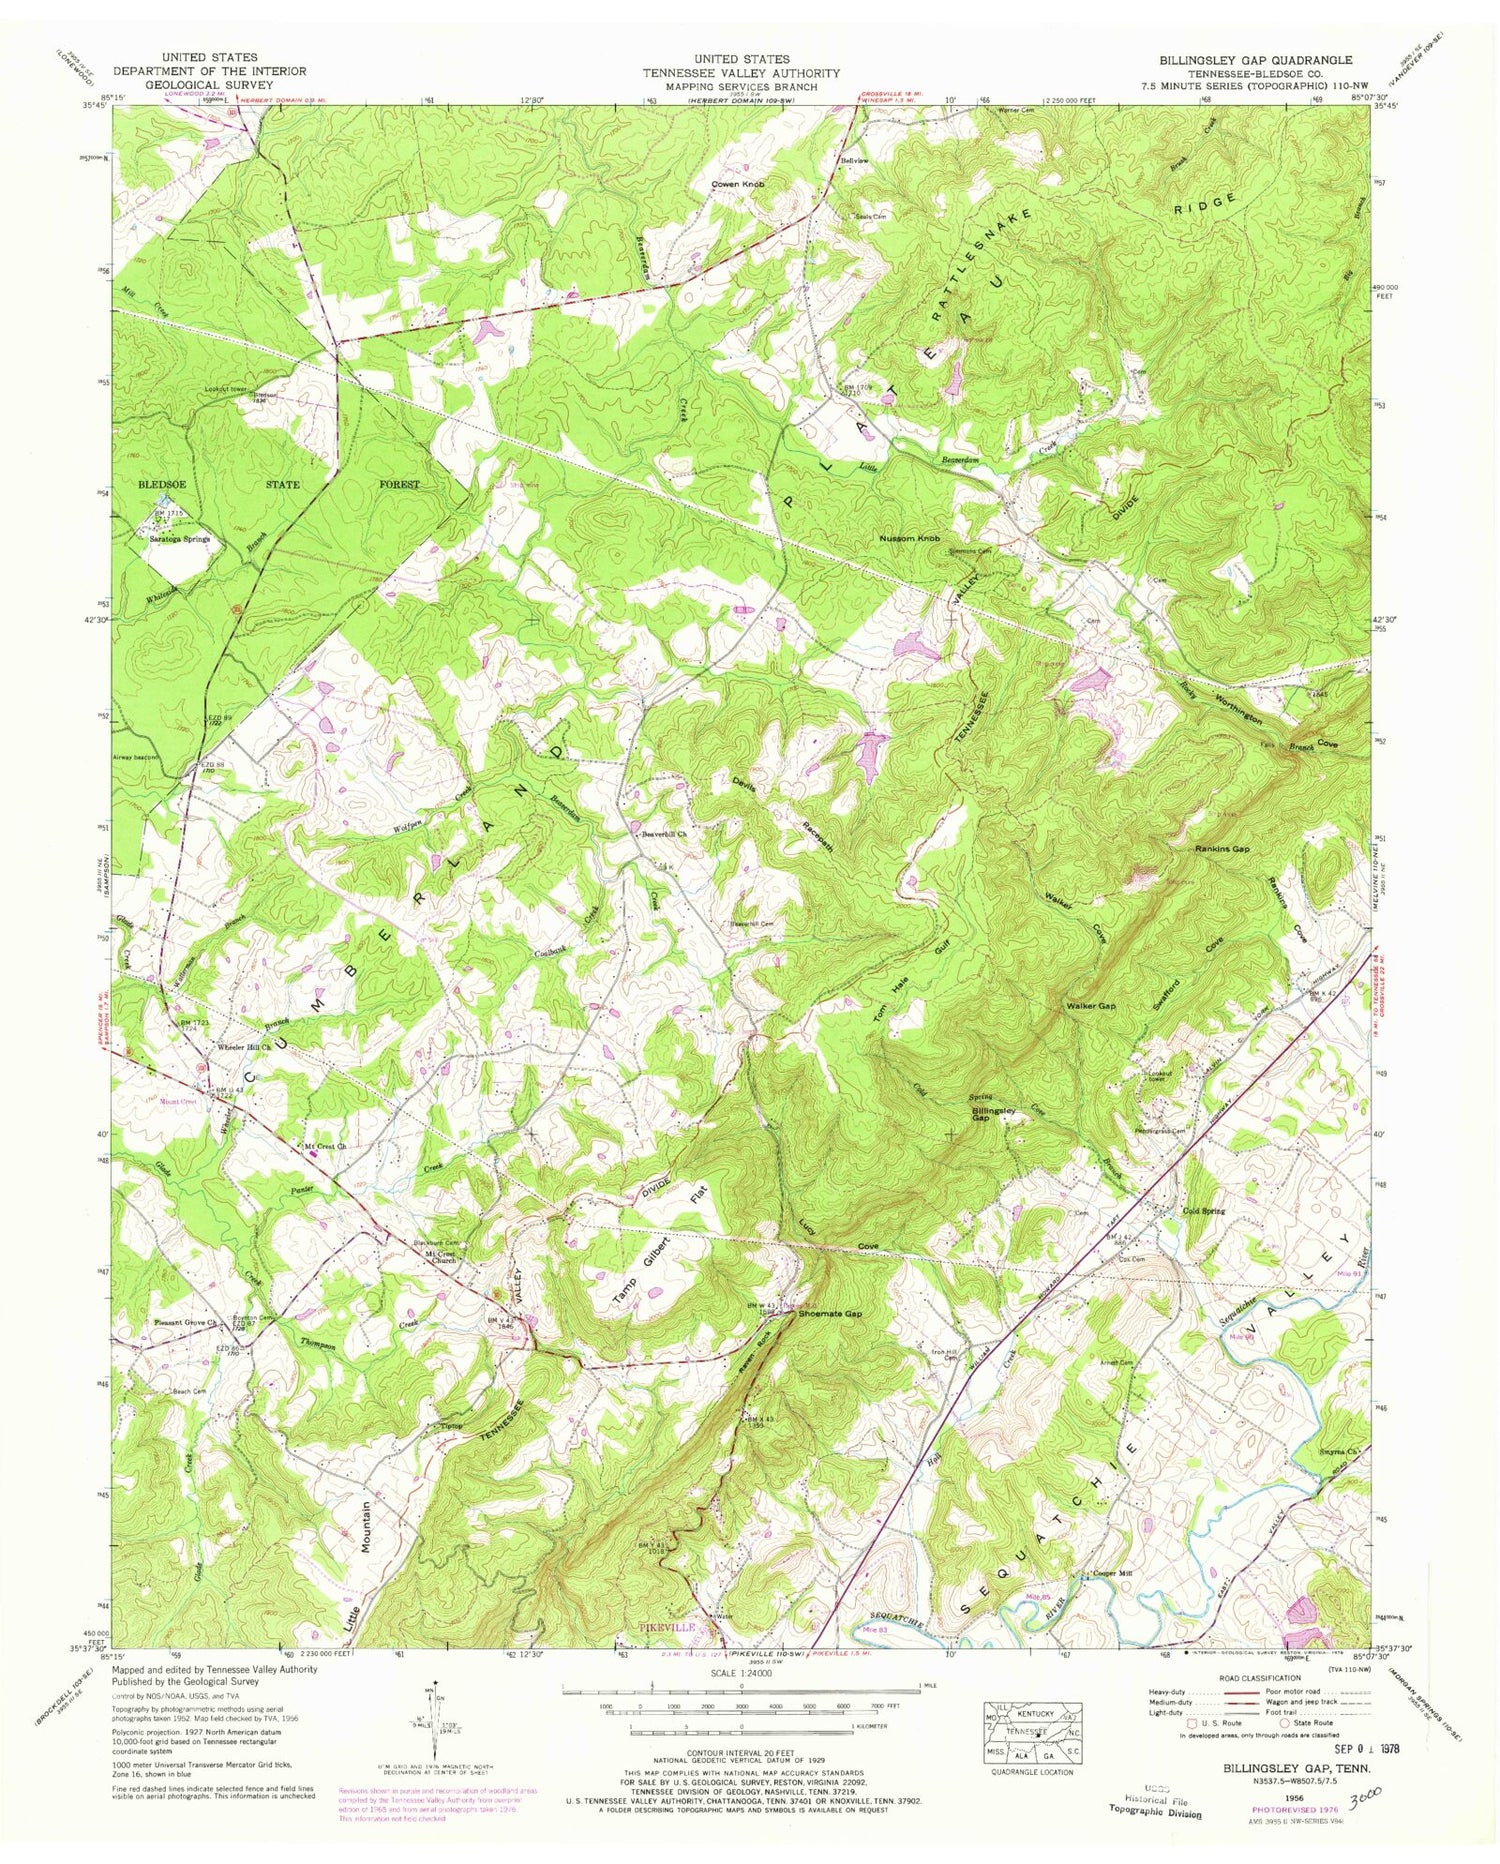 Classic USGS Billingsley Gap Tennessee 7.5'x7.5' Topo Map Image